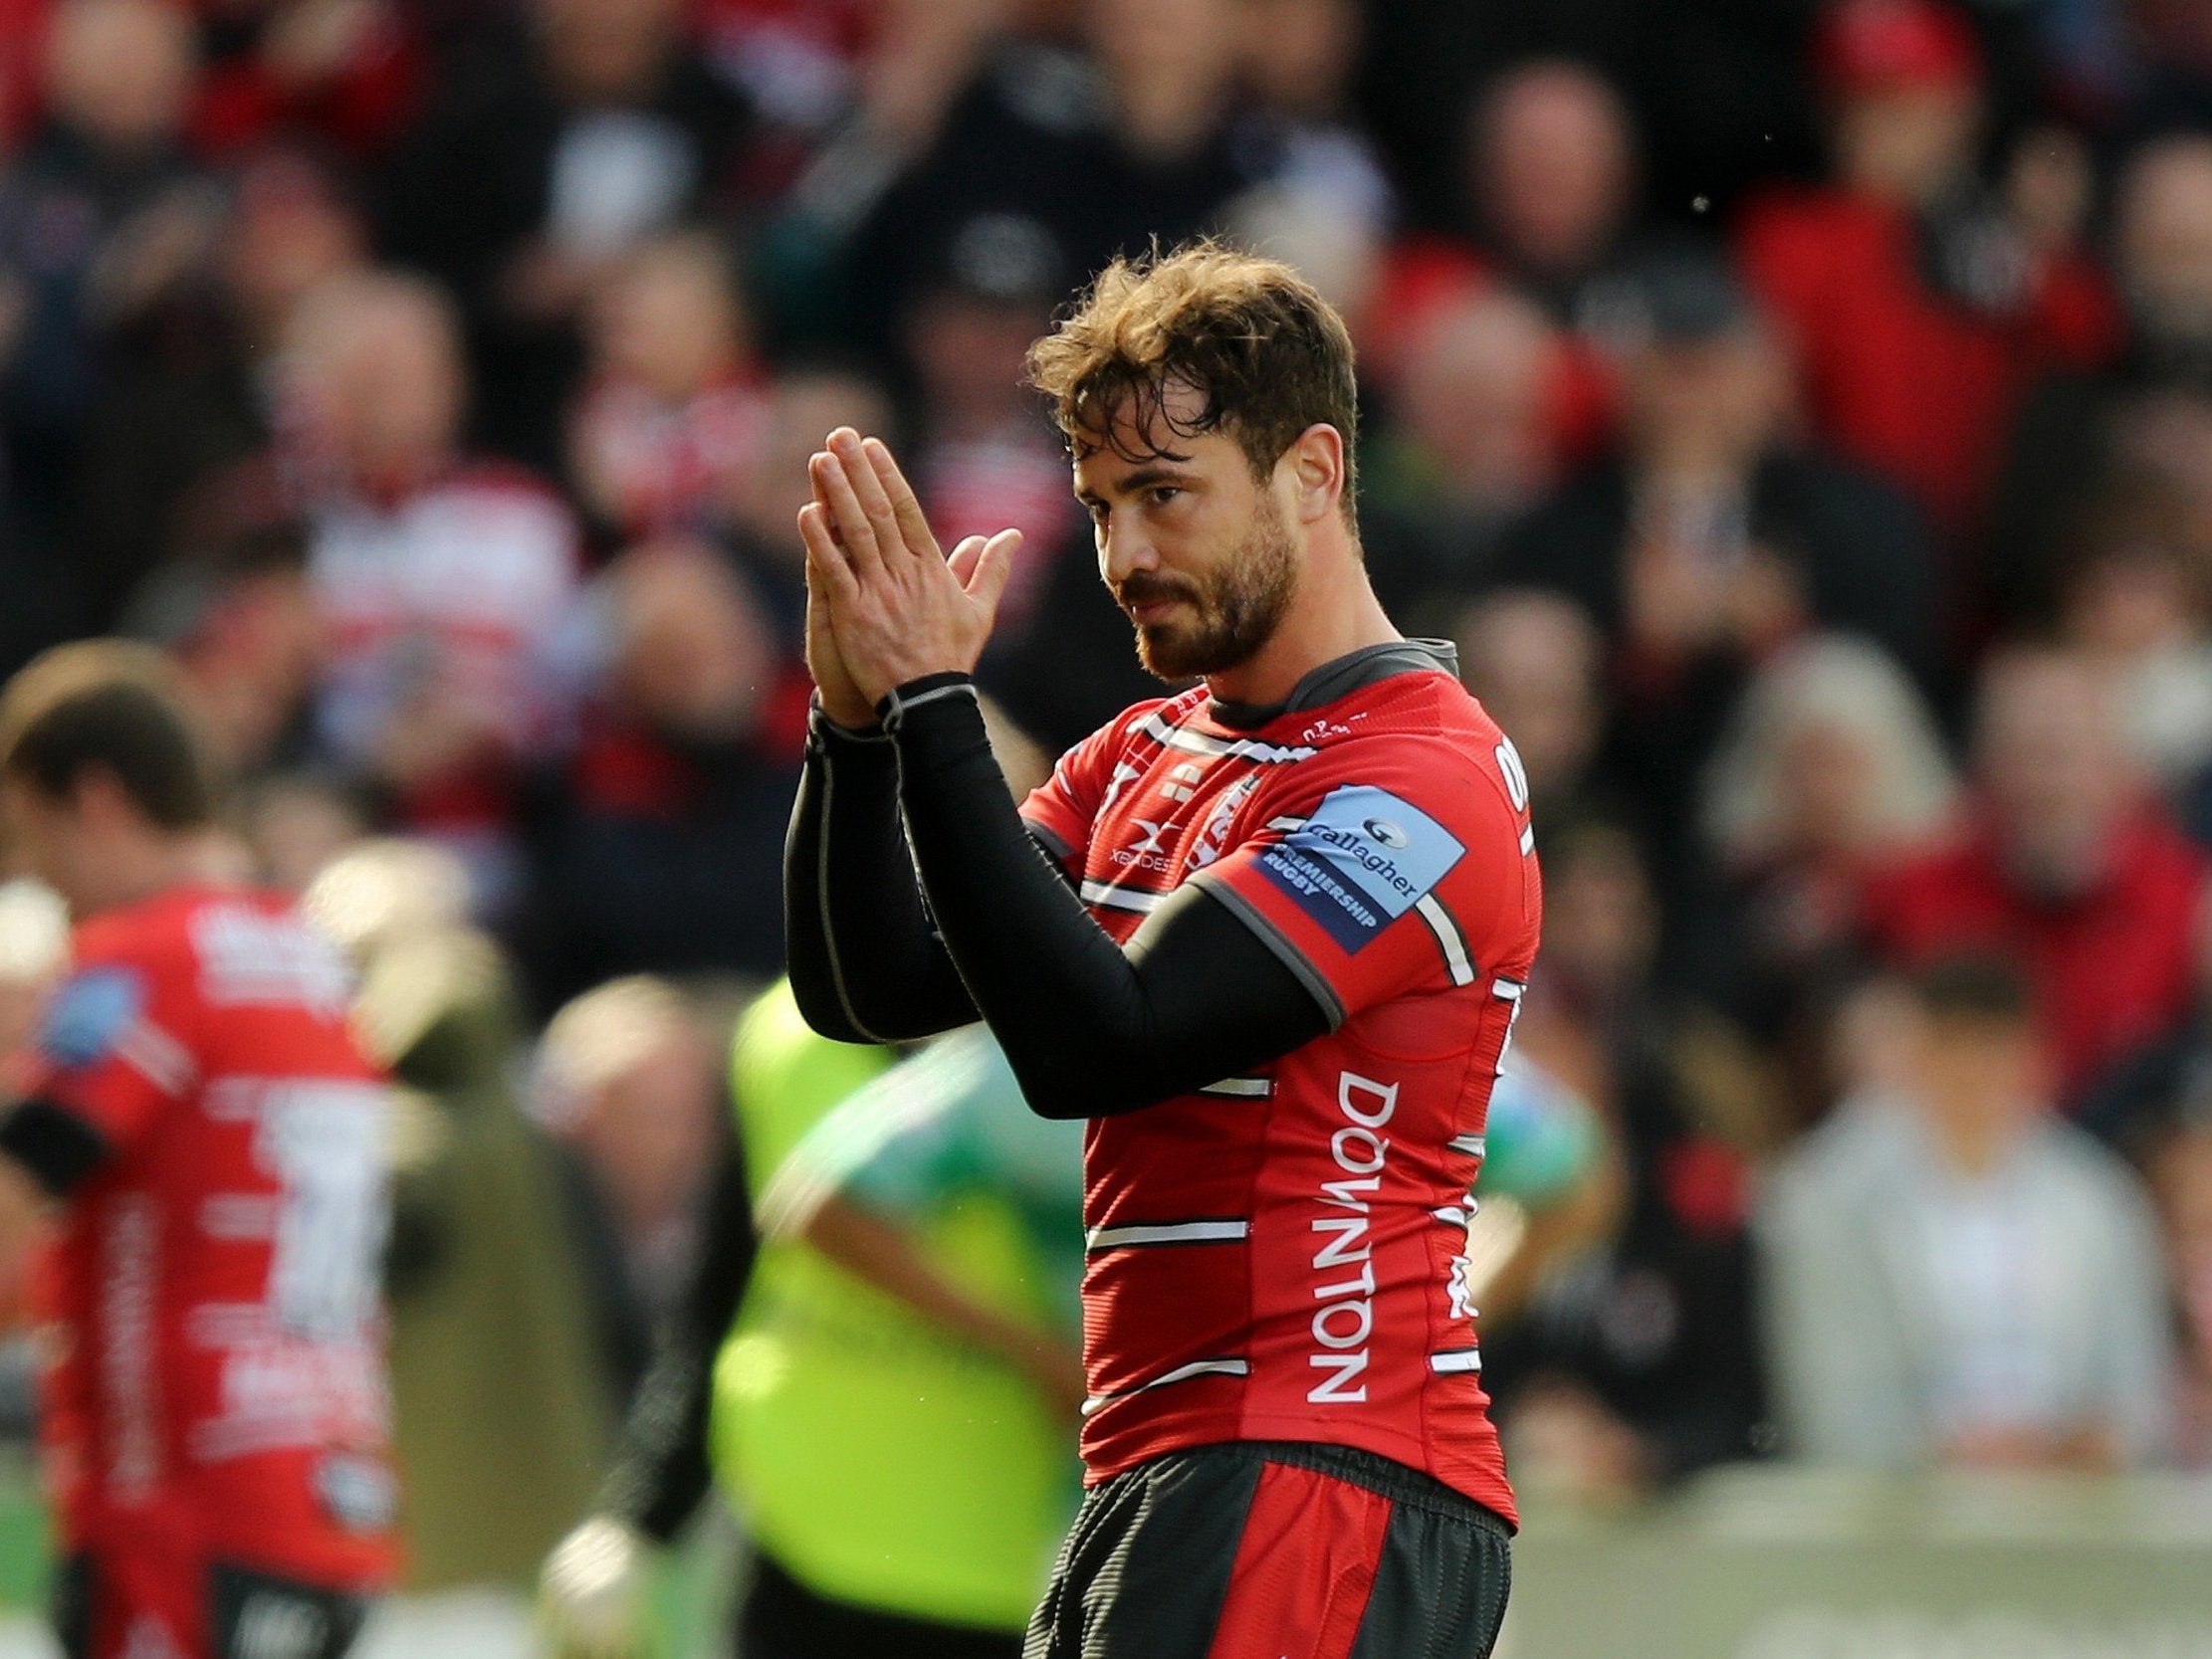 Danny Cipriani applauds the Gloucester fans as he leaves the field